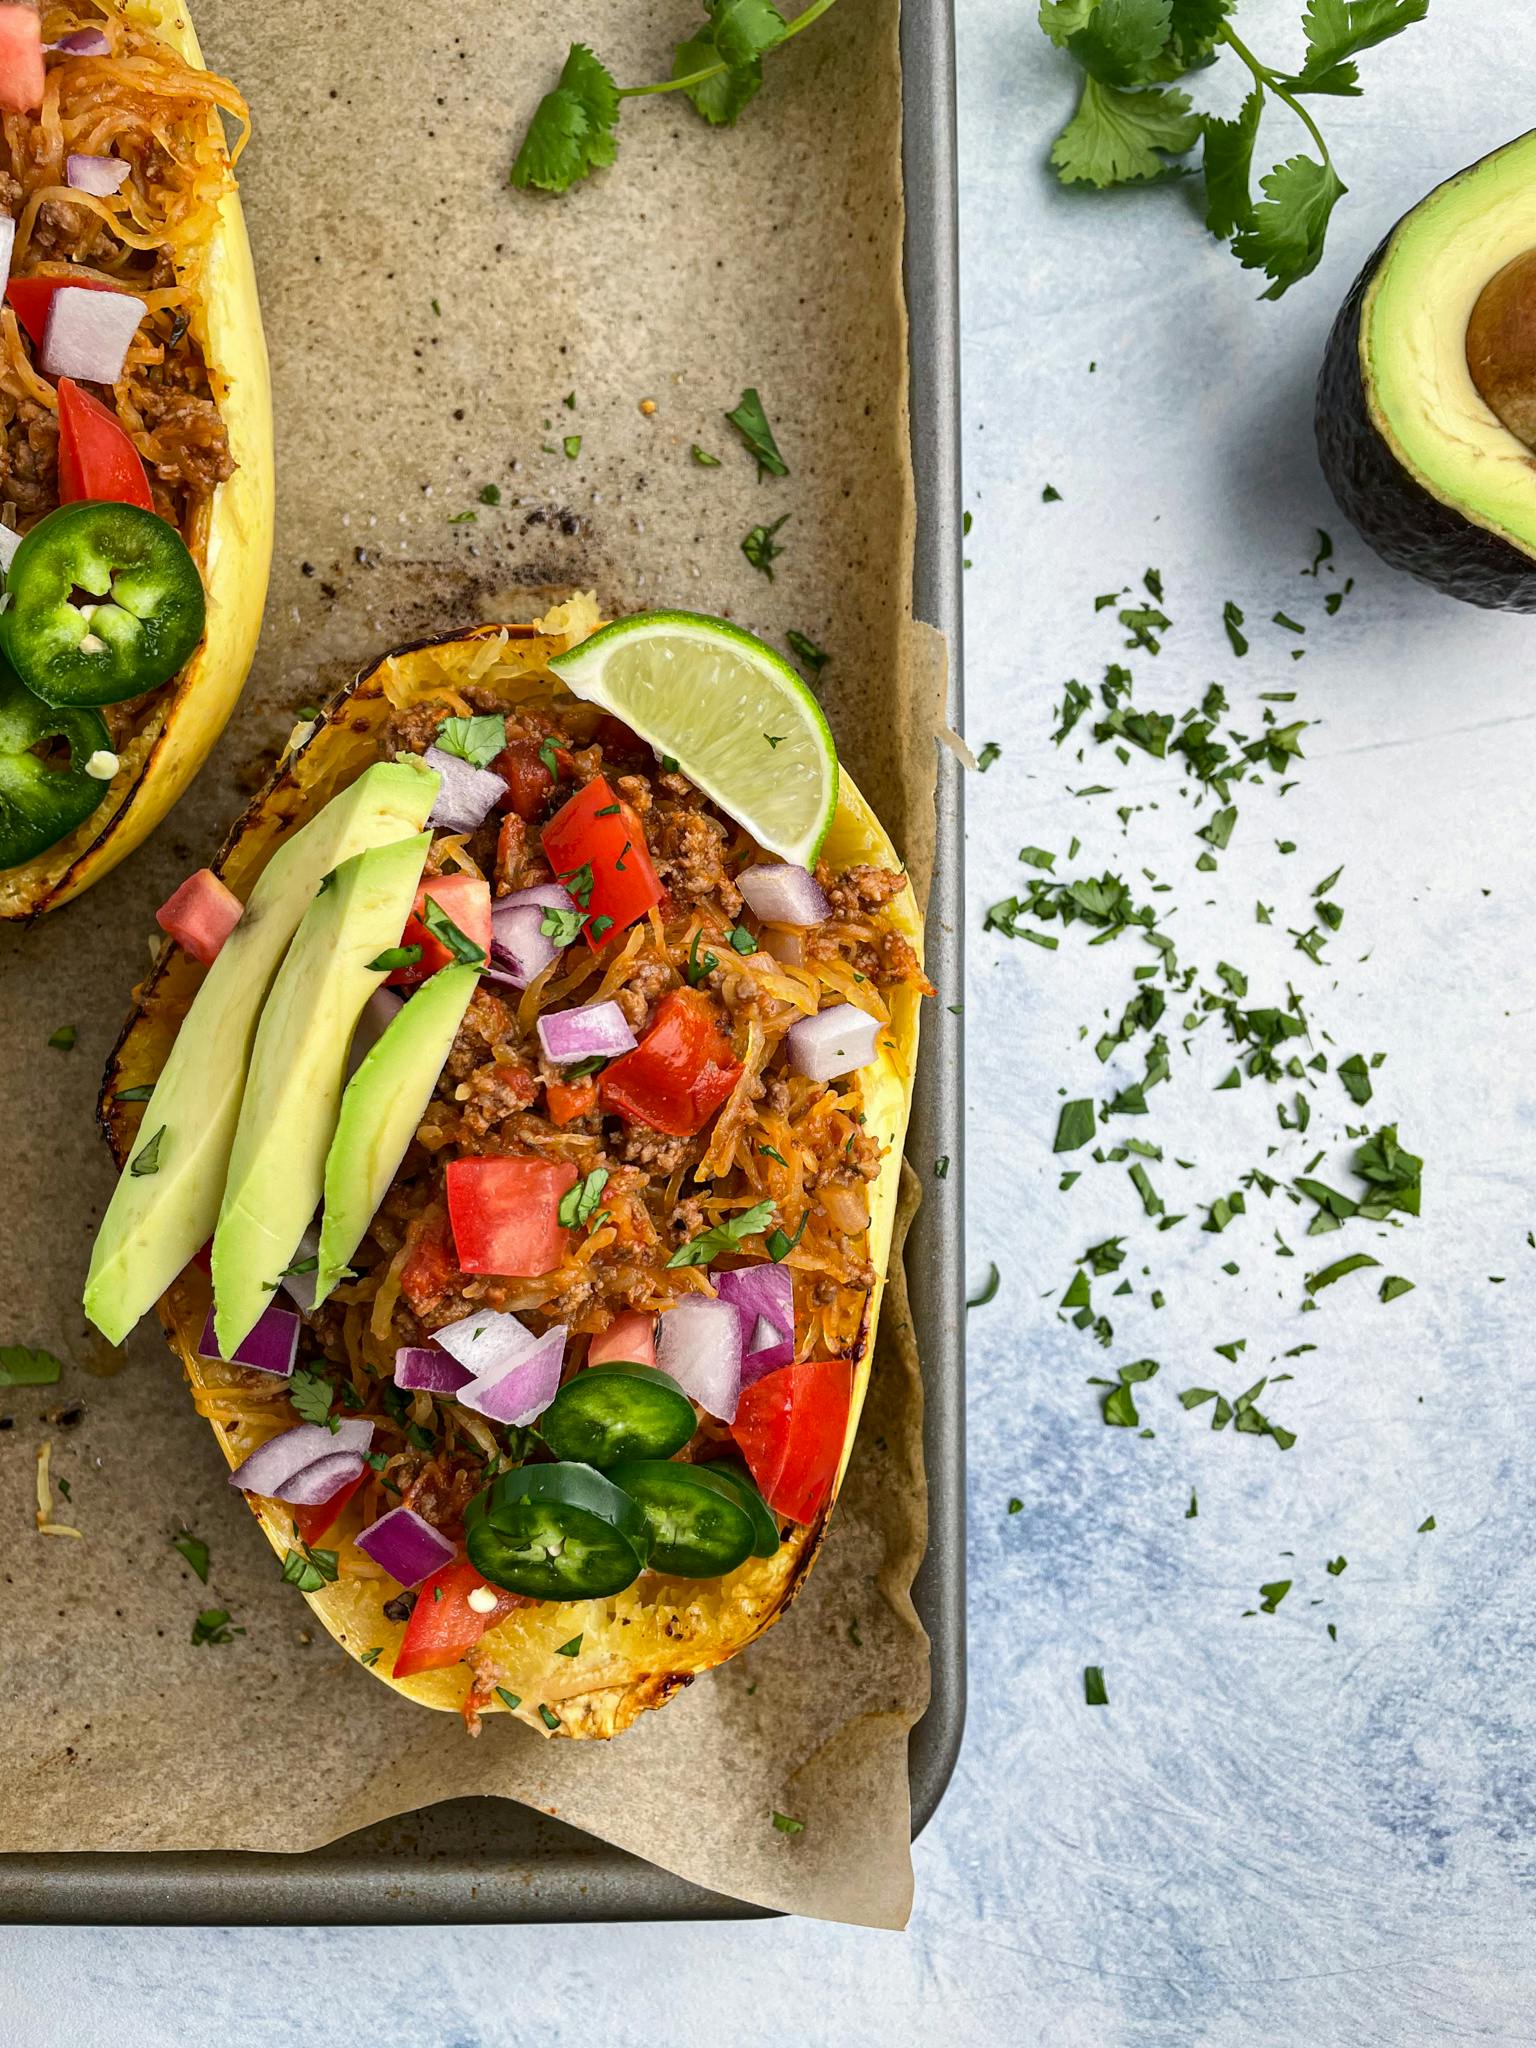 Taco stuffed spaghetti squash on a baking sheet with toppings